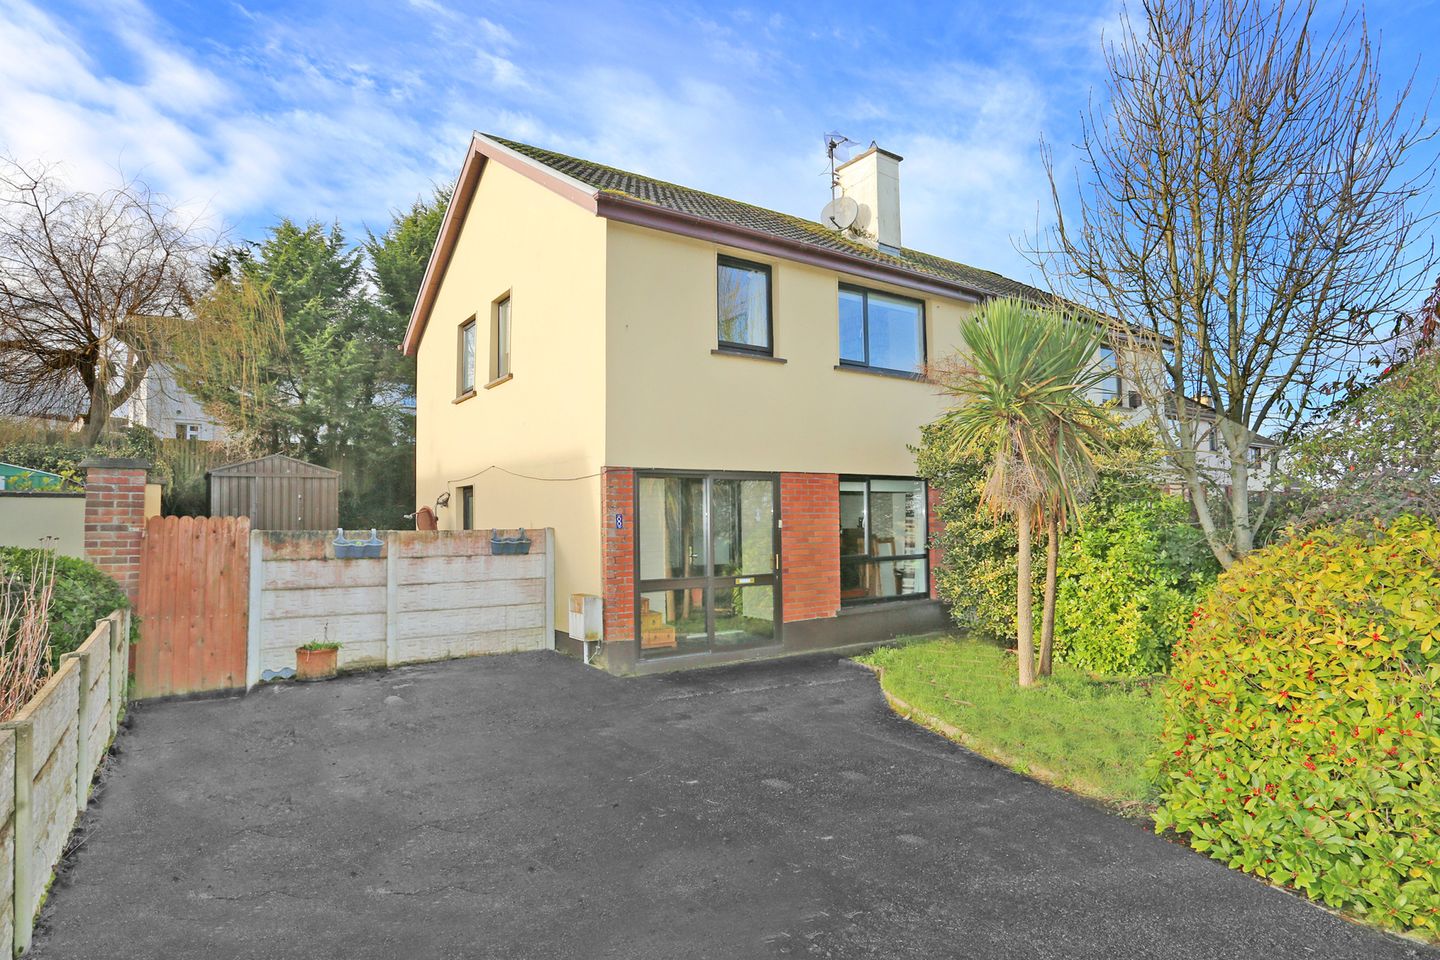 8 Sycamore Heights, Patrickswell, Co. Limerick